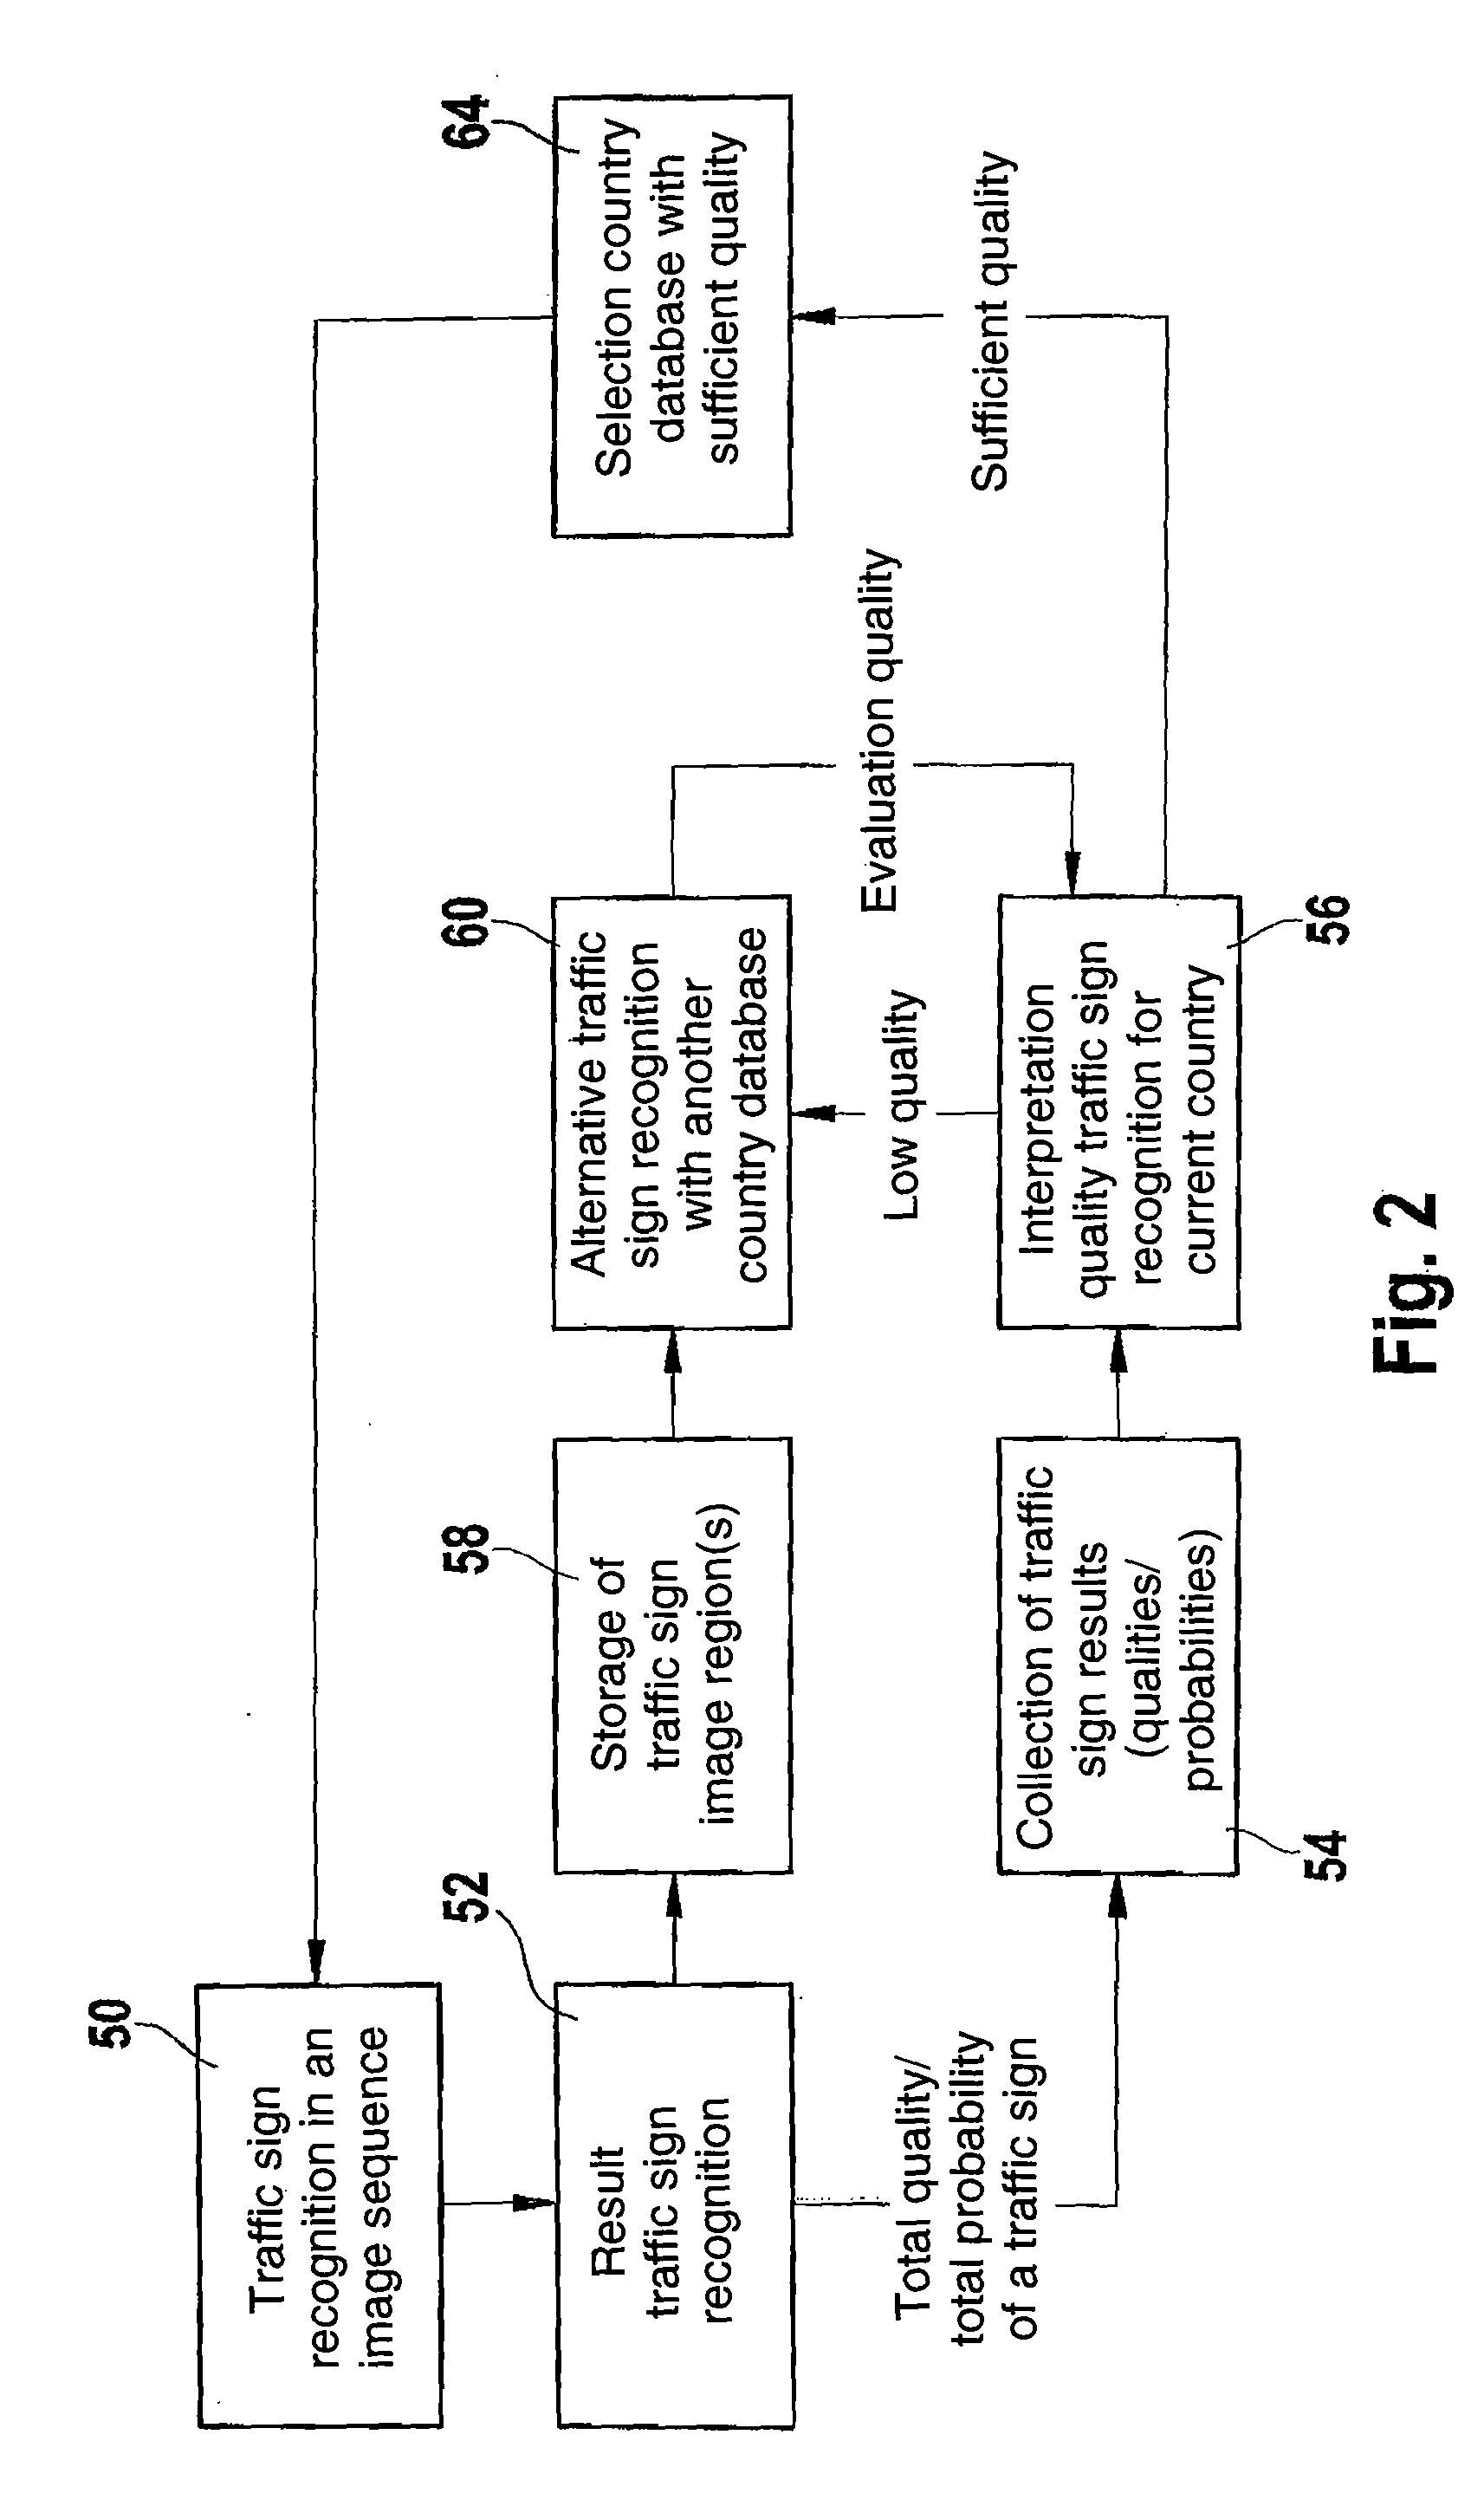 Method and Device for Traffic Sign Recognition